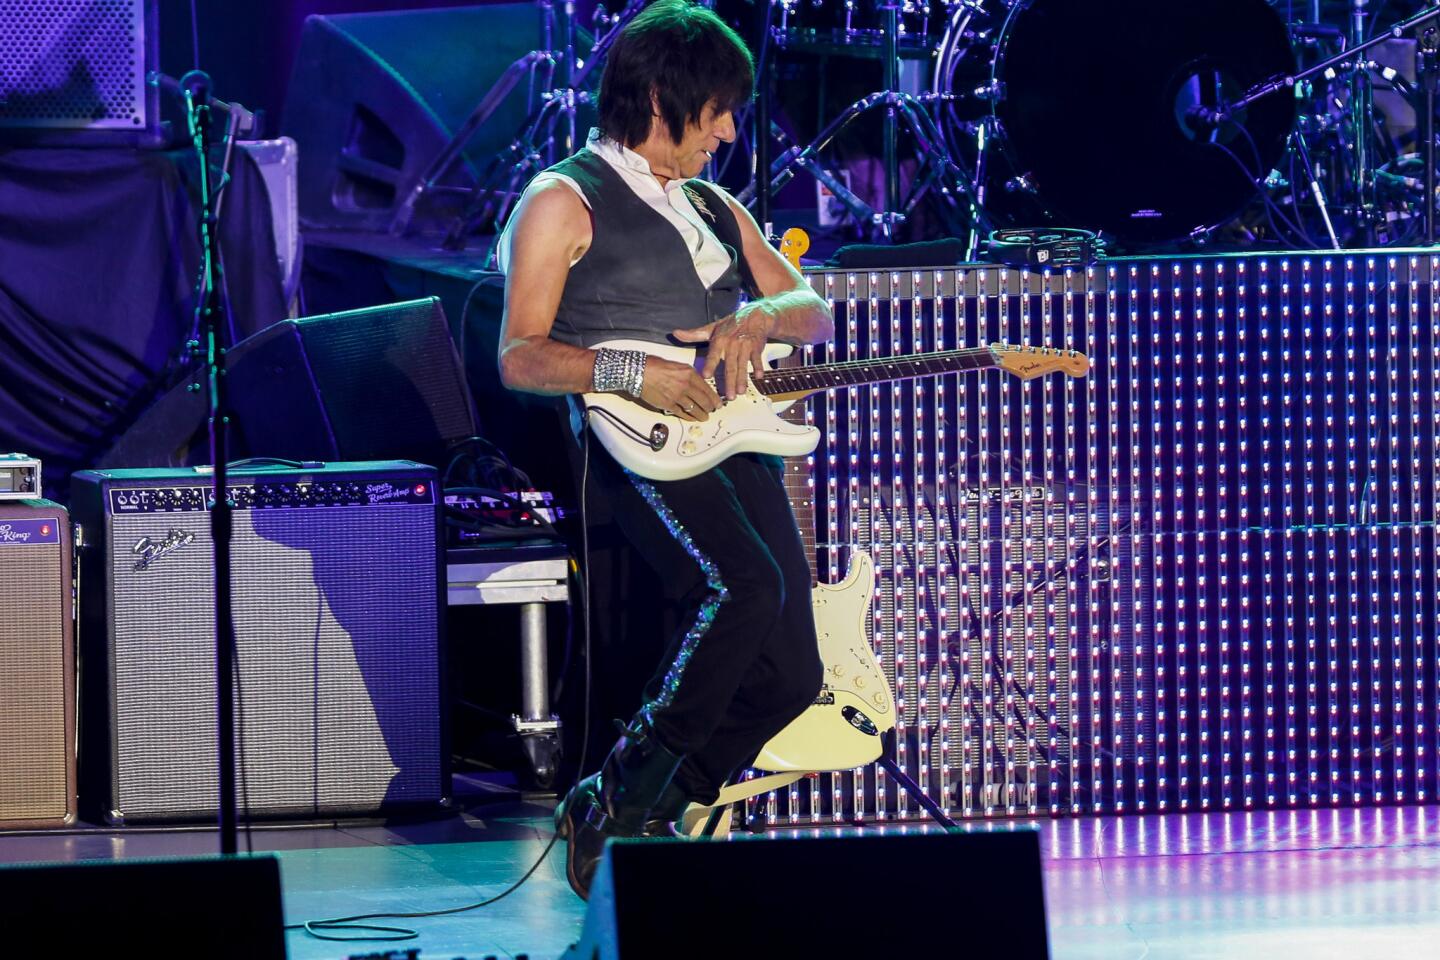 Guitar legend Jeff Beck mesmerizes concertgoers during his performance the Greek Theatre in Los Angeles on Oct. 20, 2013, where he shared a bill with Beach Boy Brian Wilson.